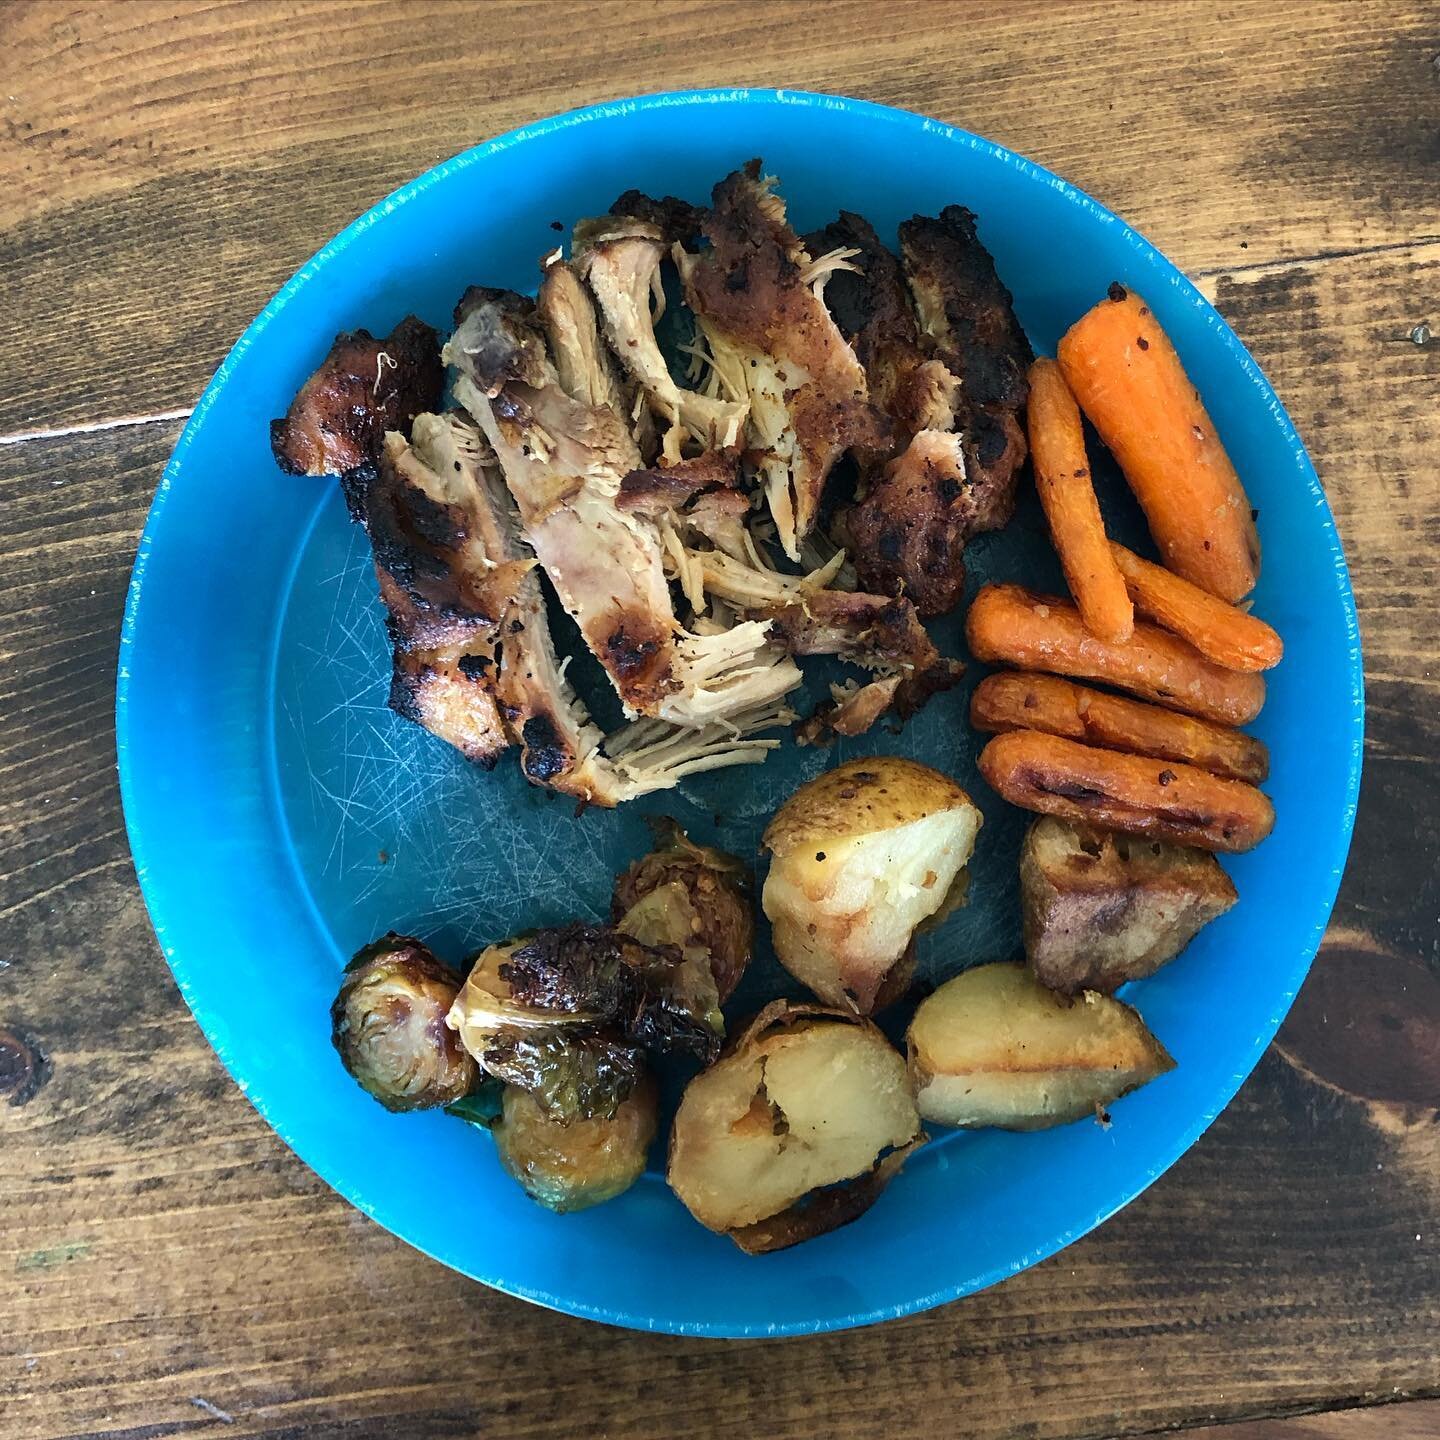 Finishing up the last of the leftovers from last week. Thankfully, chicken thighs reheat nicely and last more than a week in the fridge.
- chicken thigh strips
- roasted carrots
- roasted brussell sprouts 
.
I used to be squeamish about eating leftov